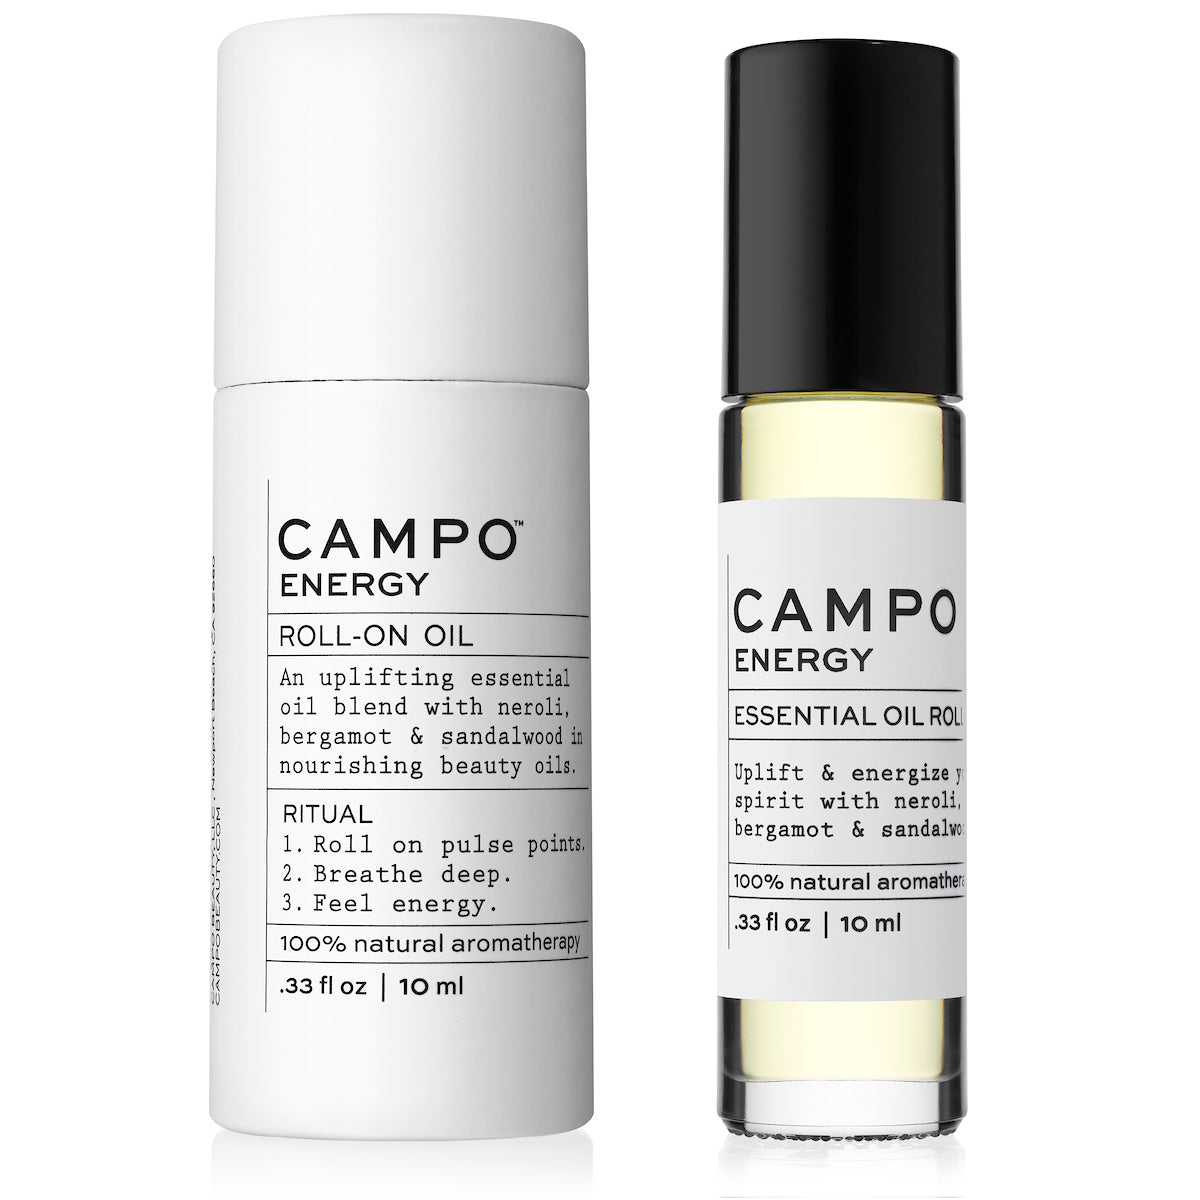 Campo Beauty ENERGY Blend Essential Oil Roll-On in 10 ml. Restores a sense of vitality and alertness. Uplift &amp; energize your spirits naturally with this 100% pure essential oil roll-on blend of Neroli Orange Blossom, Bergamot, Sweet Orange, and Bitter Orange with a hint of Sandalwood. A refreshing and distinctive rich citrus scent with sweet and flowery notes. Pre-blended with 100% natural beauty carrier oils, so it&#39;s jet-set and ready to roll!